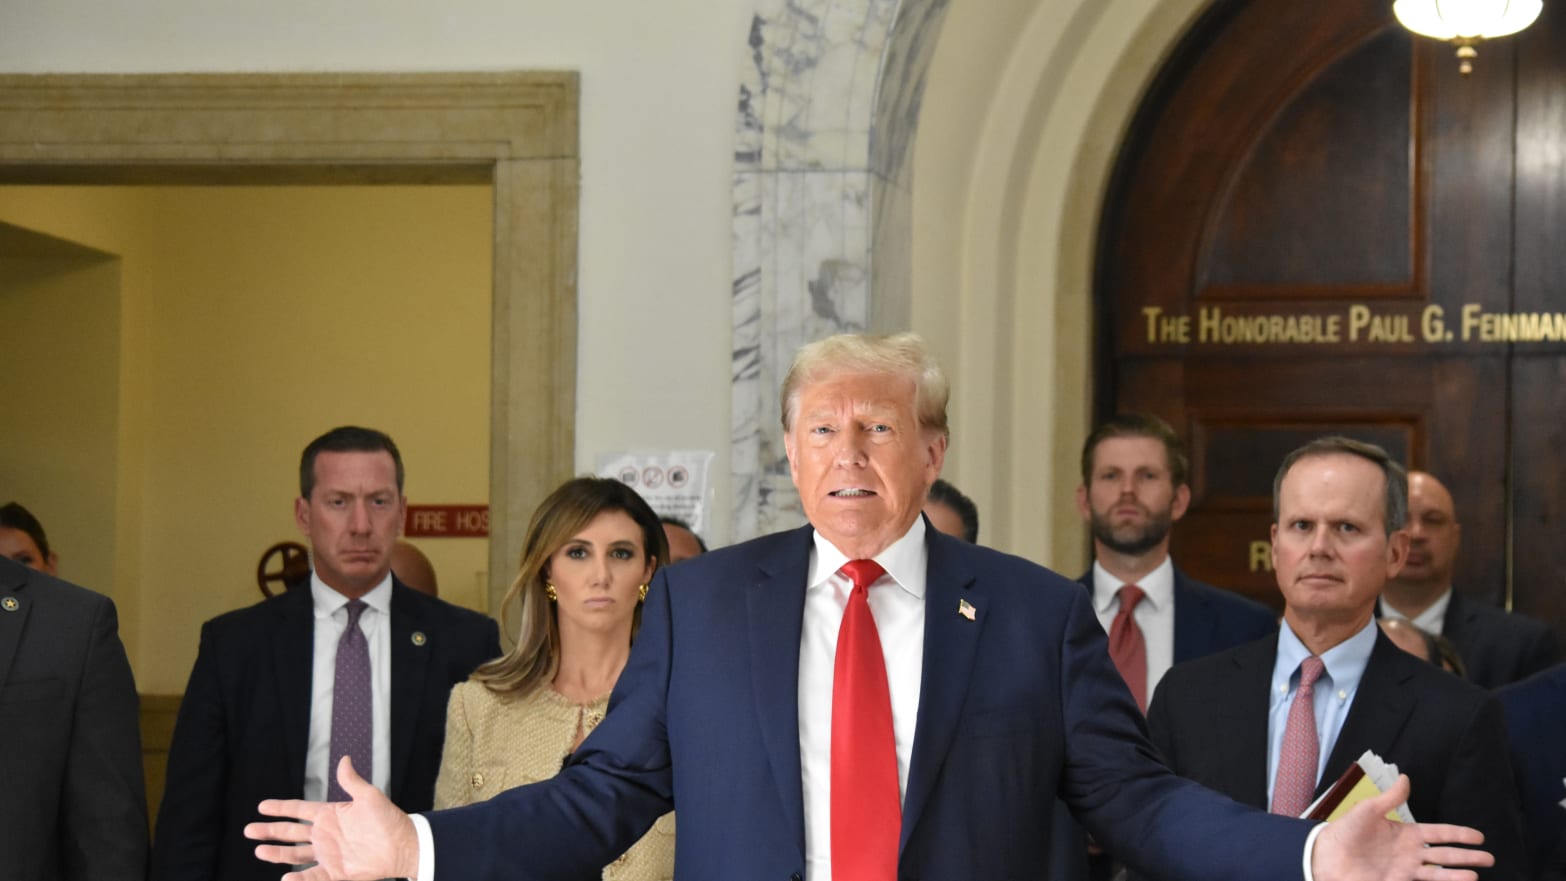 Former President of the United States Donald J. Trump appears in the hallway of the courthouse